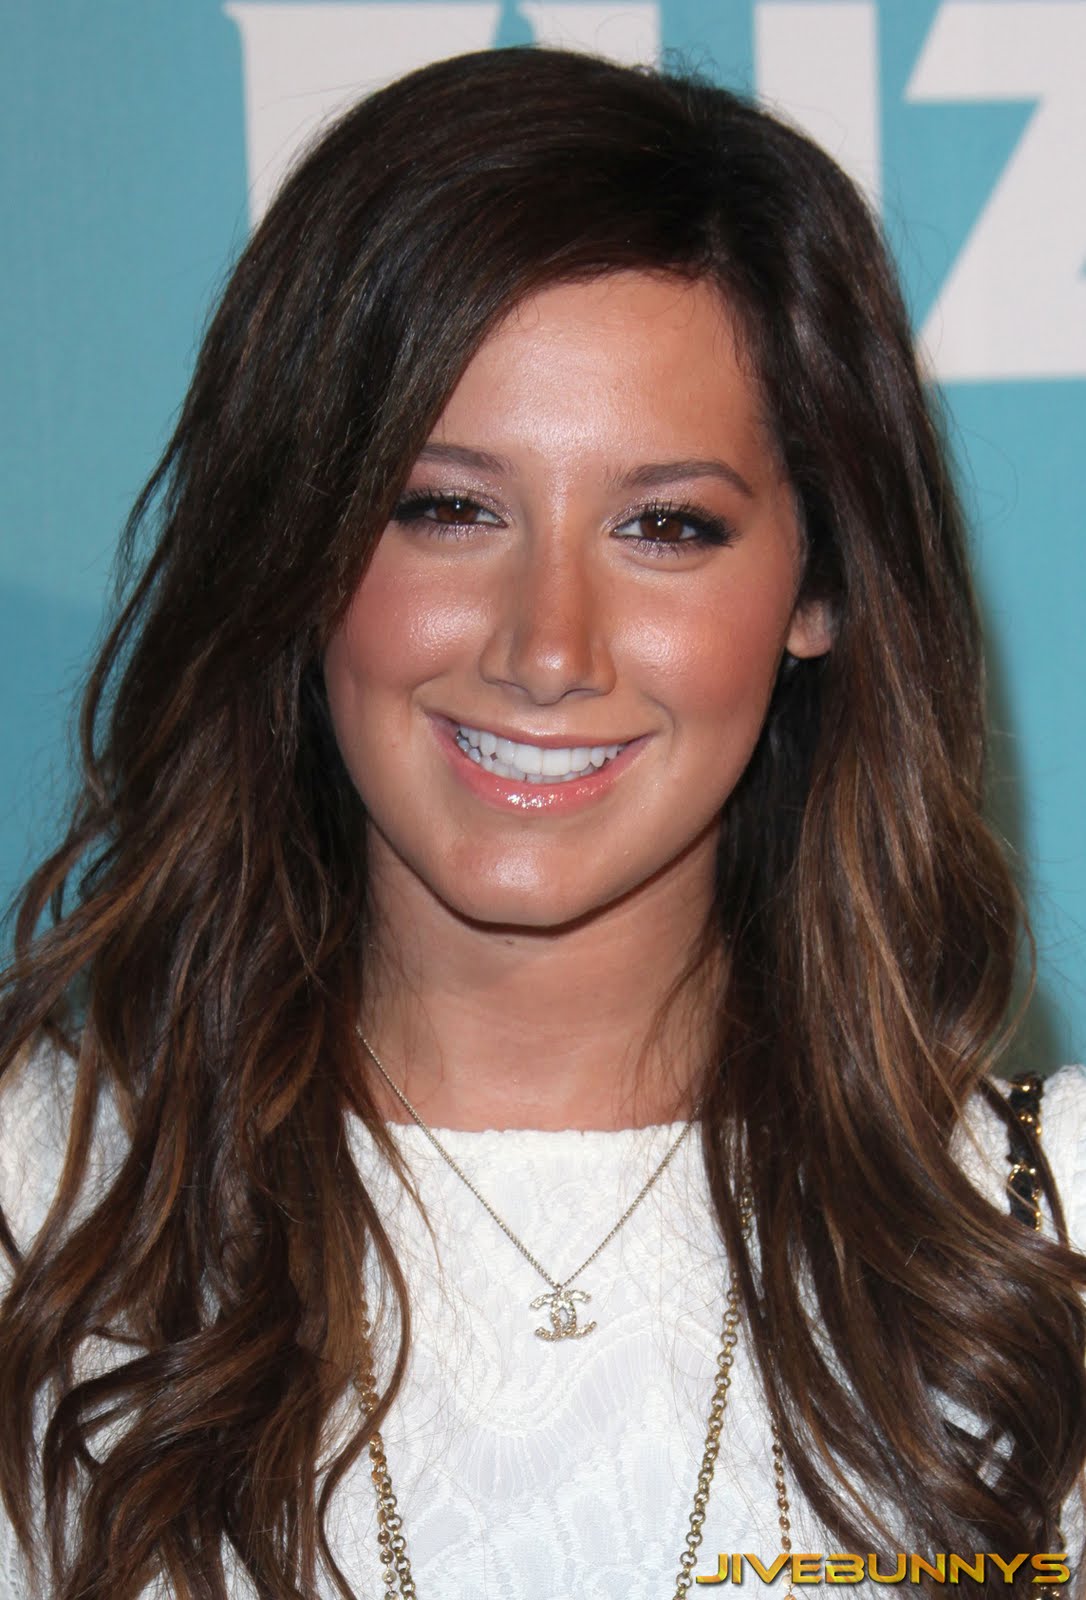 Previous Gallery of Ashley Tisdale. 